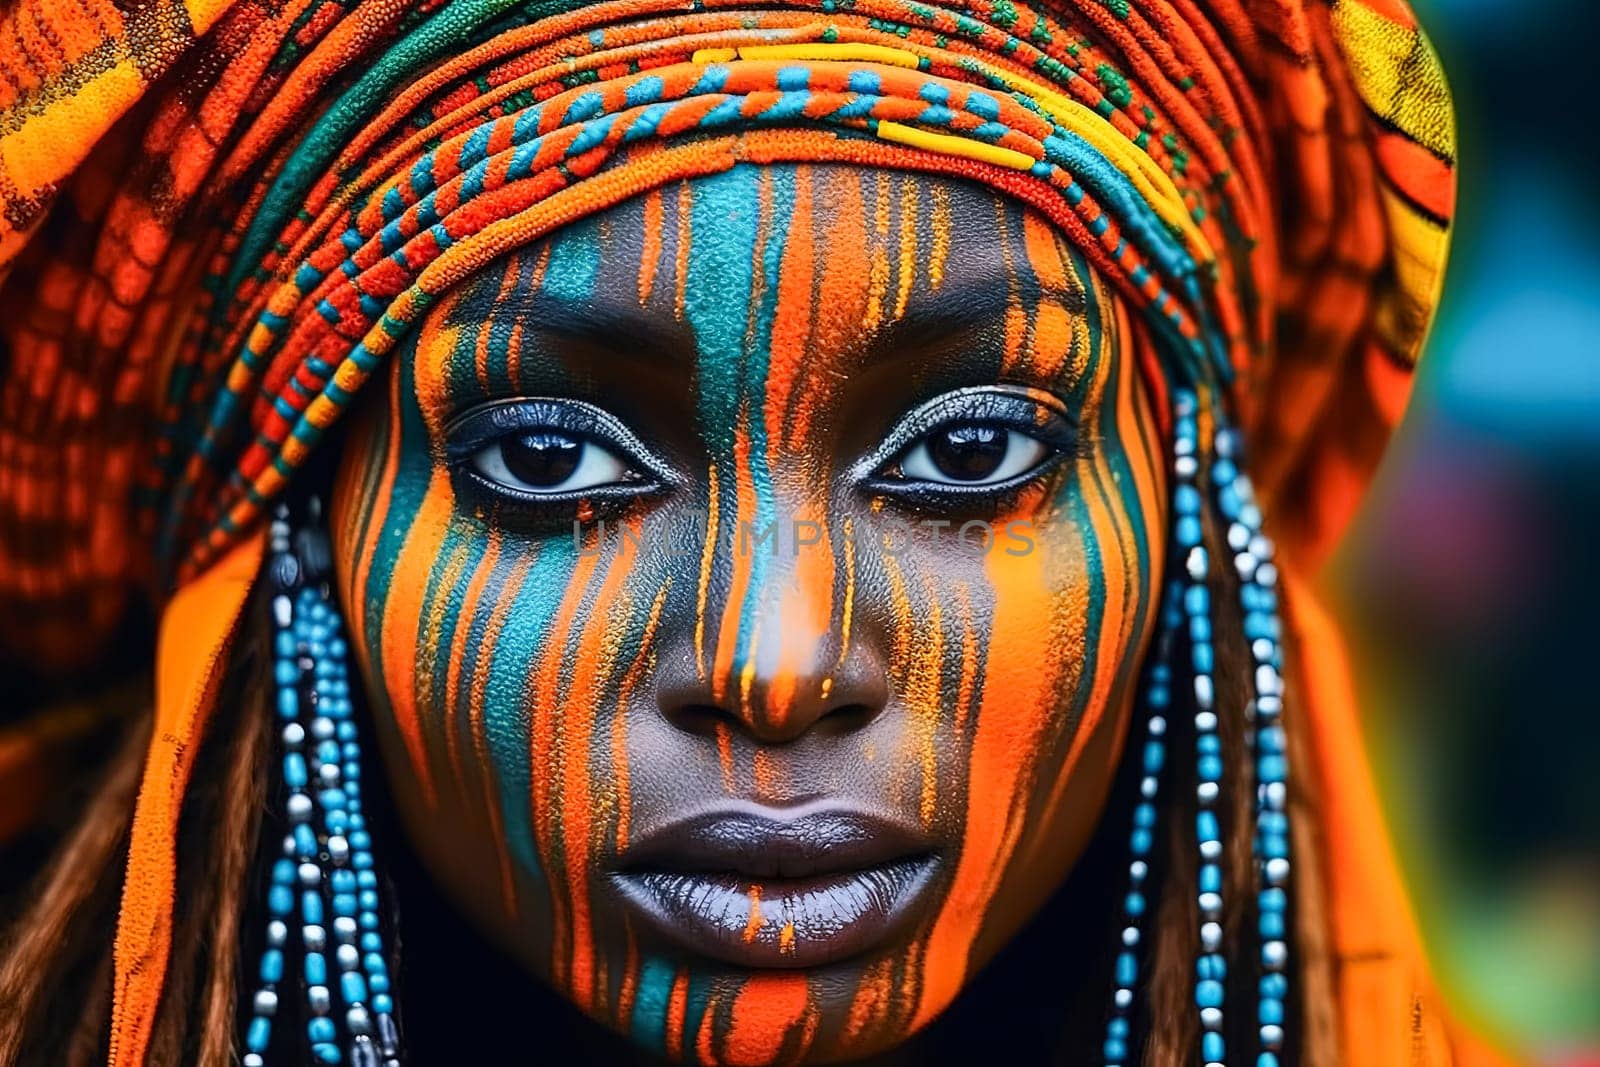 a woman adorned with tribal face paint embodies the strength and heritage of her ancient African community in vibrant detail.